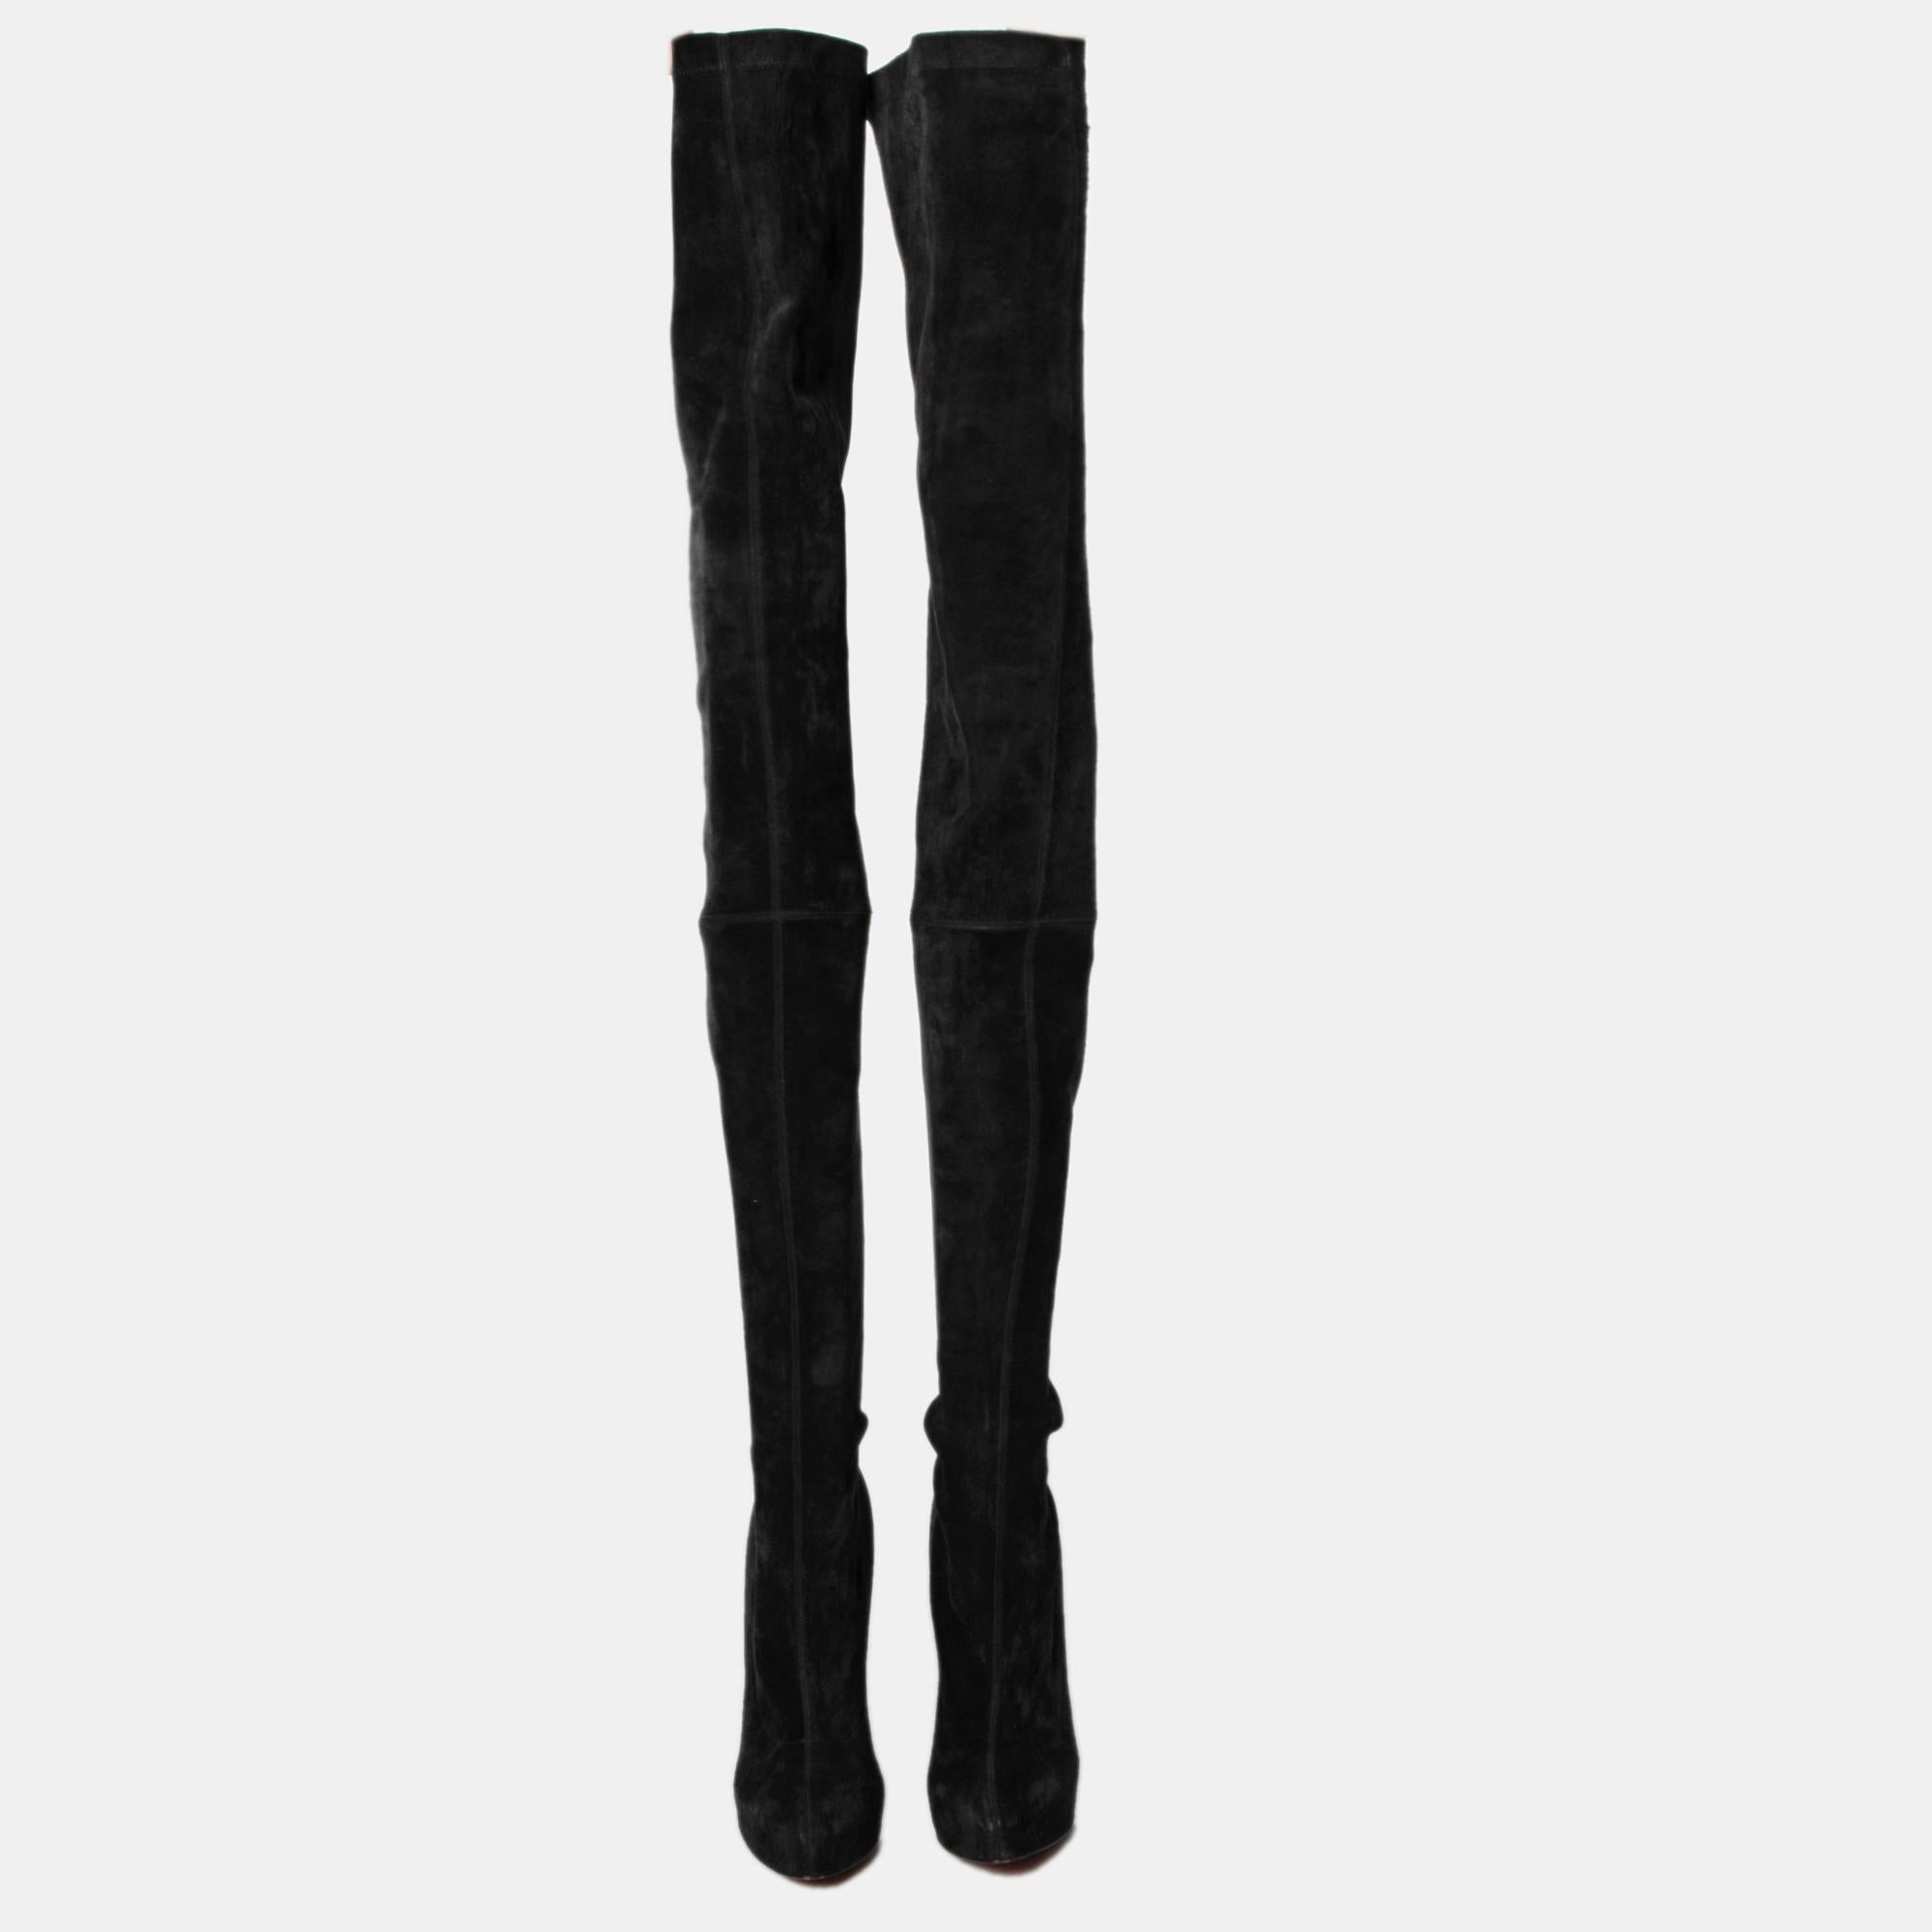 Stun the crowd when you wear these over-the-knee boots by Christian Louboutin. These edgy black boots are made from suede and feature sturdy leather soles, platforms, and towering 15 cm heels. Team them with a mini skirt and a leather jacket or with